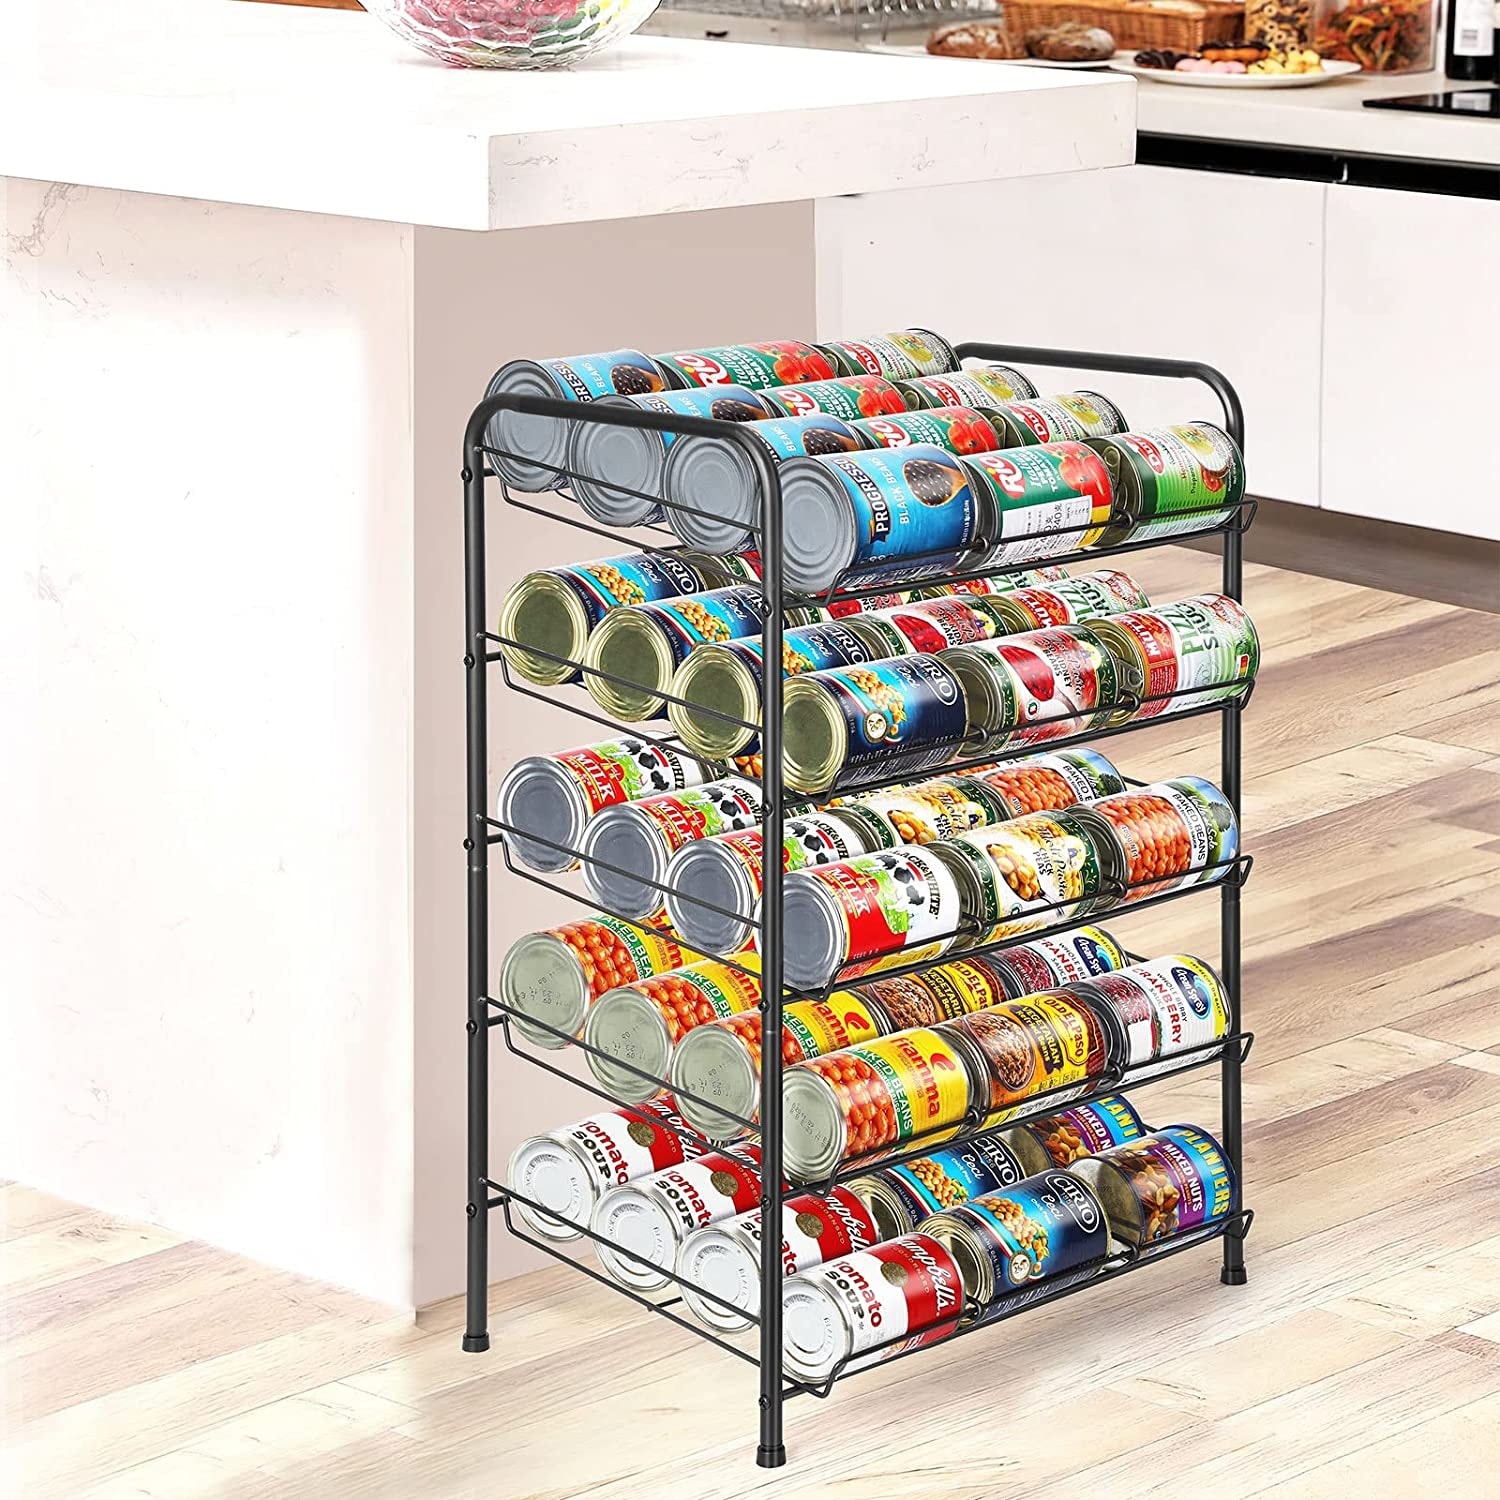 https://ak1.ostkcdn.com/images/products/is/images/direct/9b71b796657b84131c3af070e9124c99eb9aac1d/Can-Organizer-Can-Good-Organizer-for-Pantry.jpg